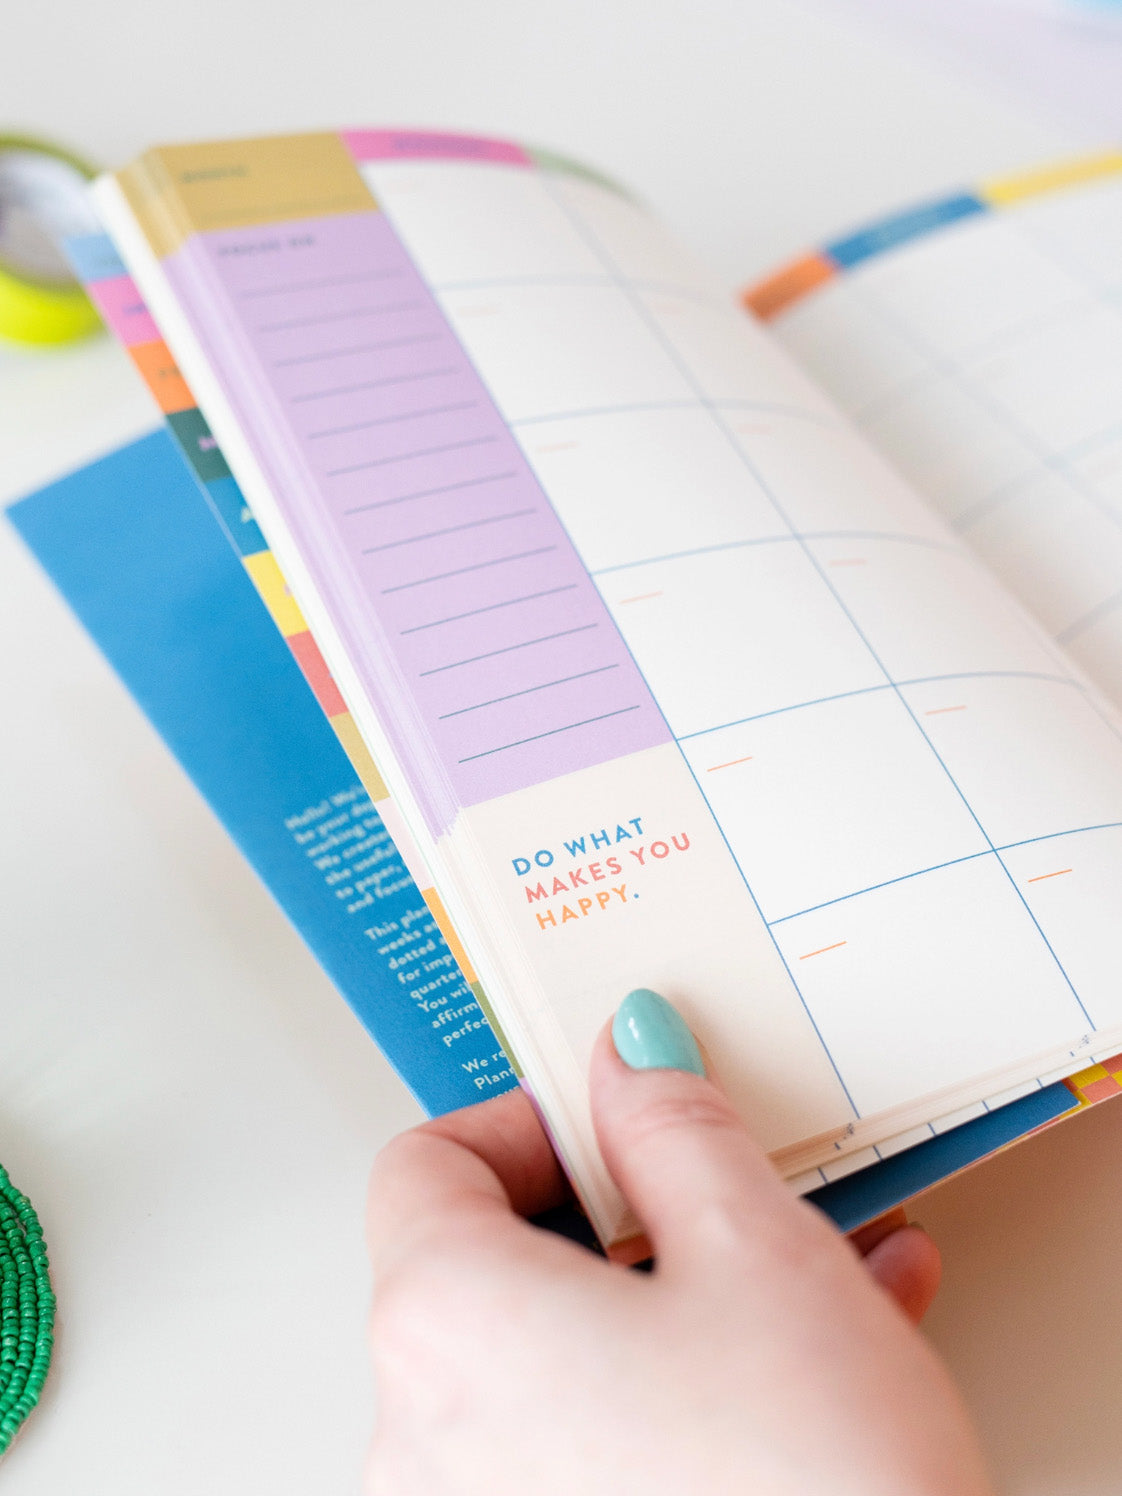 harlequin daily planner